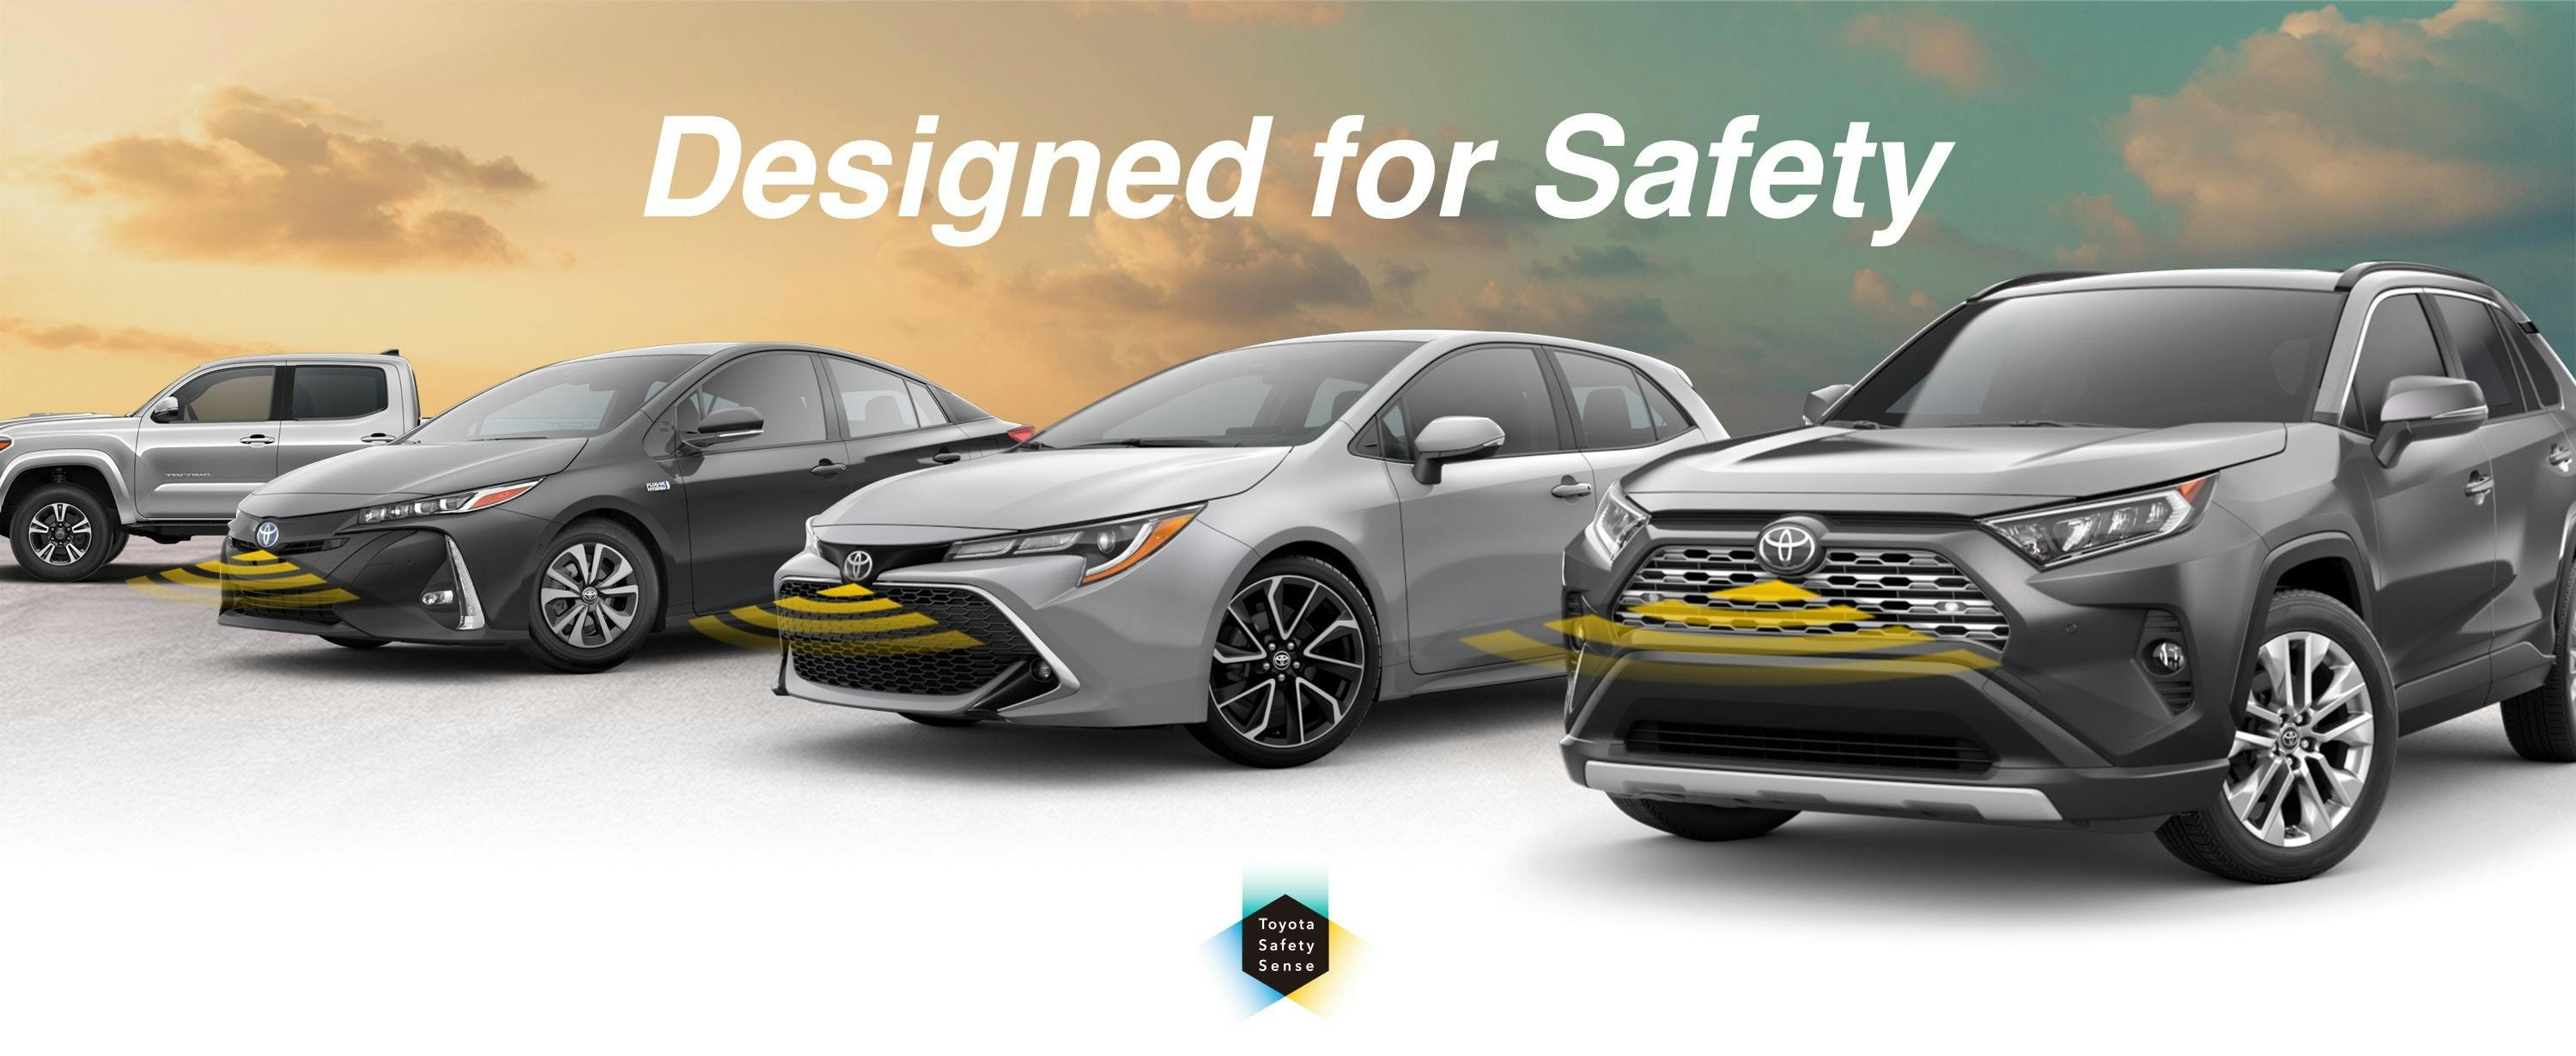 Learn More About Toyota Safety Sense